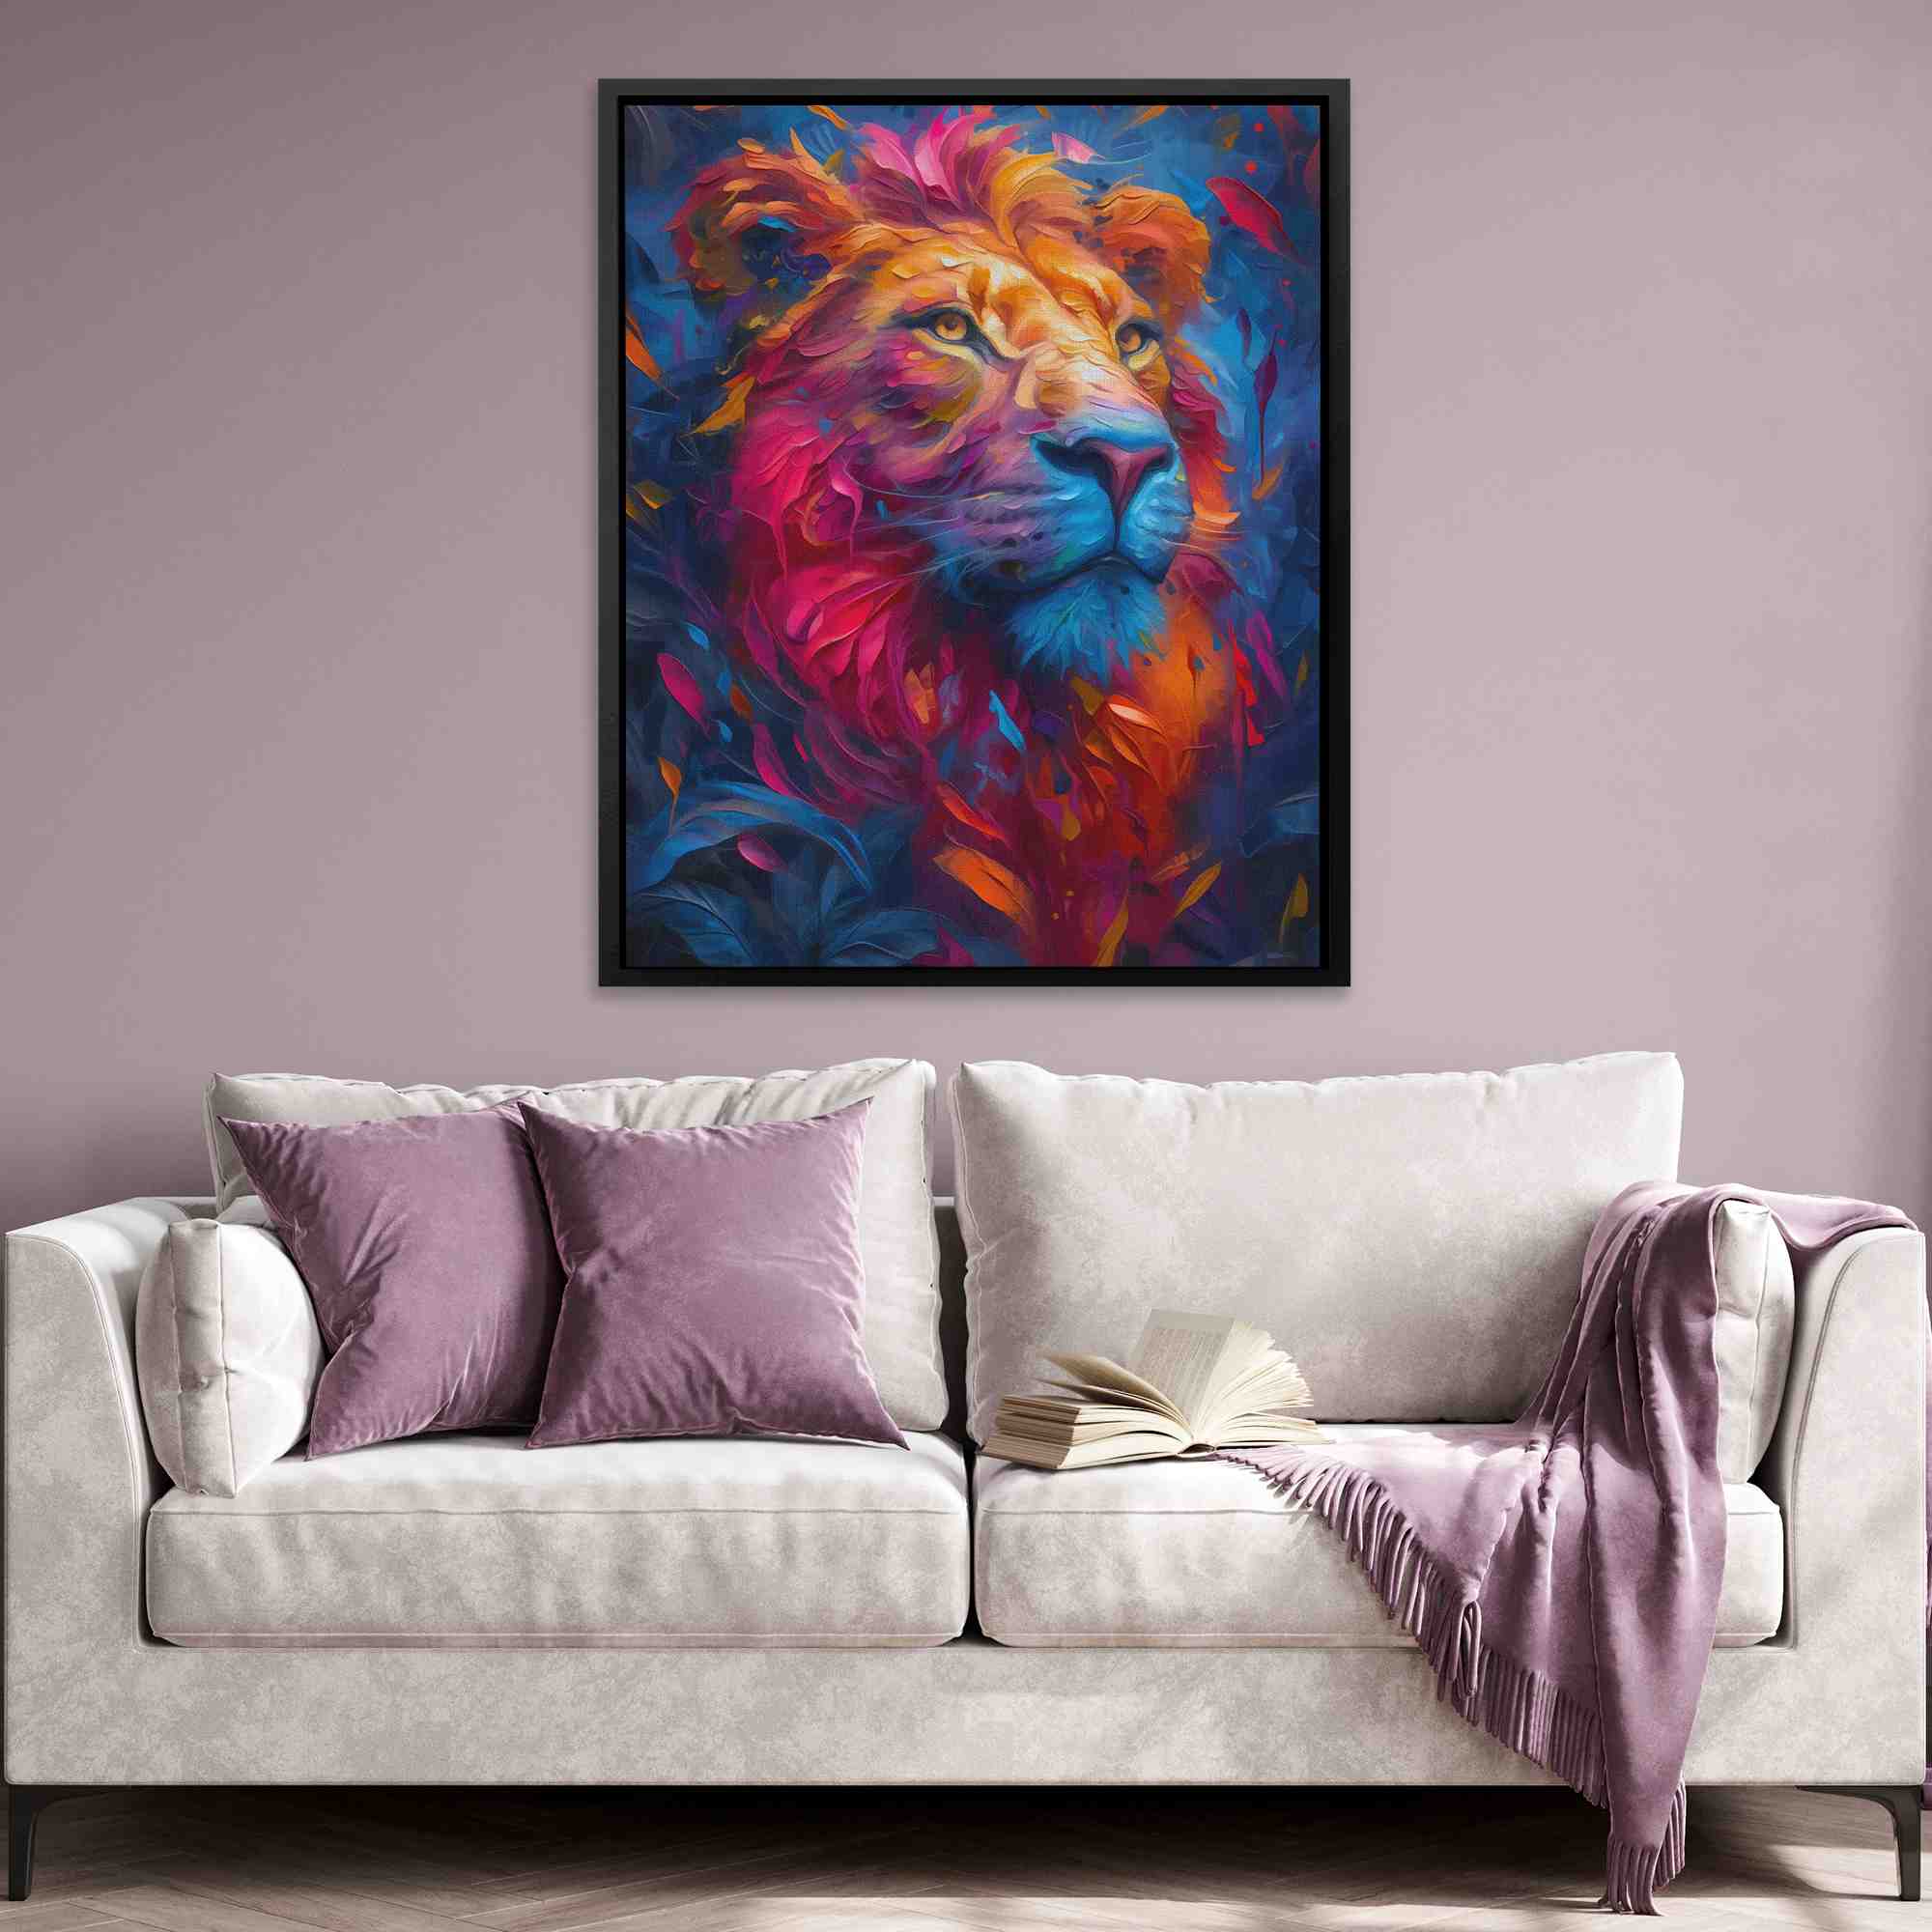 a colorful painting of a lion on a white wall